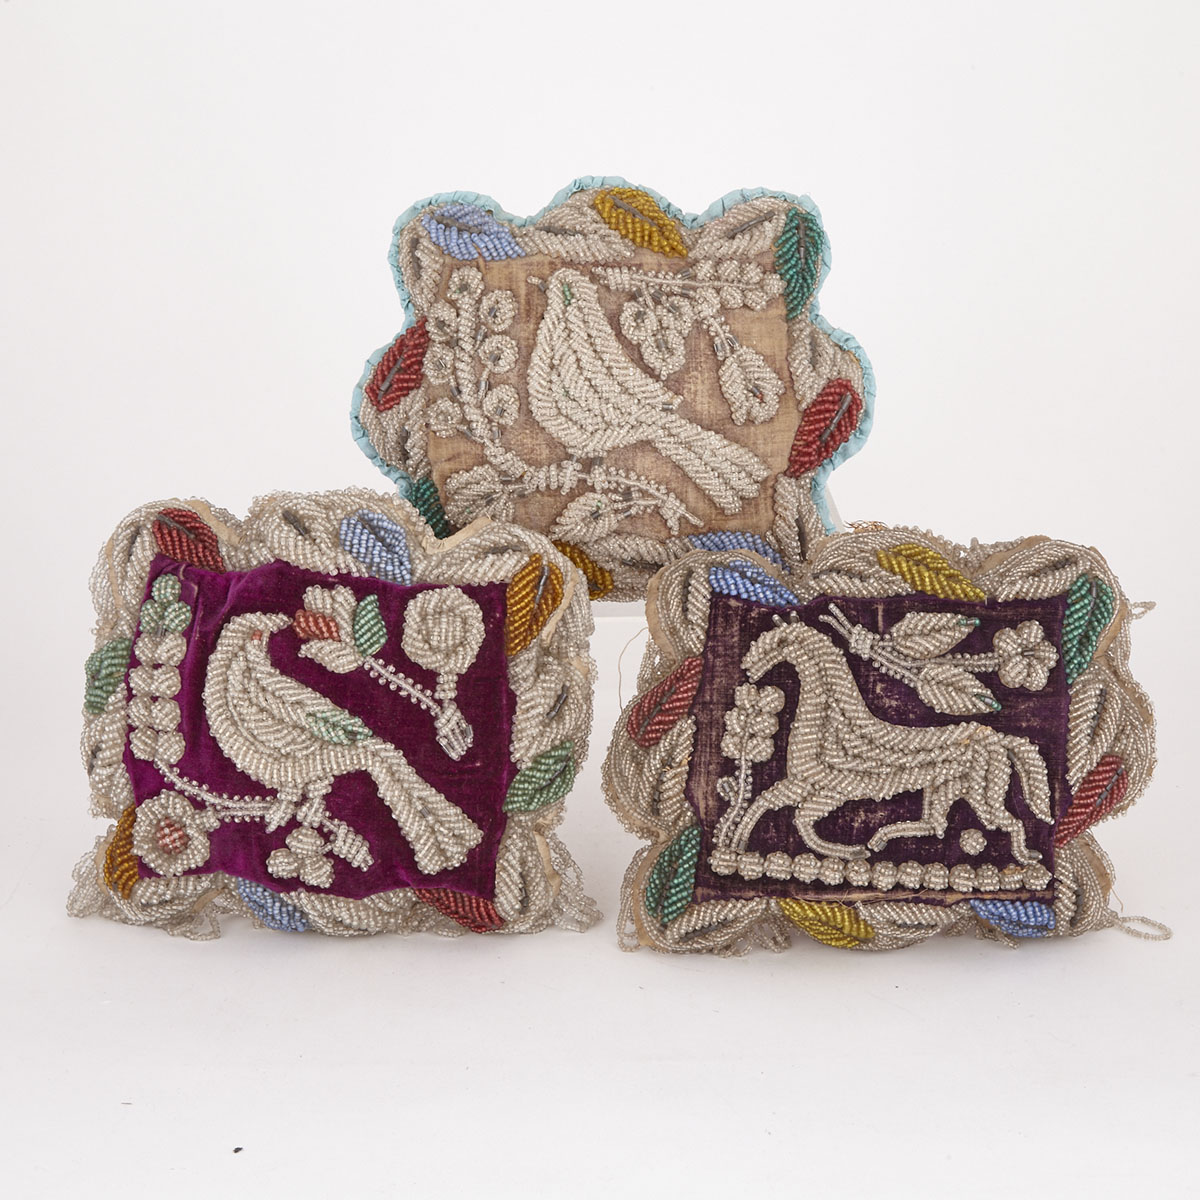 Three Large Iroquois Beaded Pin Cushion Whimsies, late 19th/early 20th century